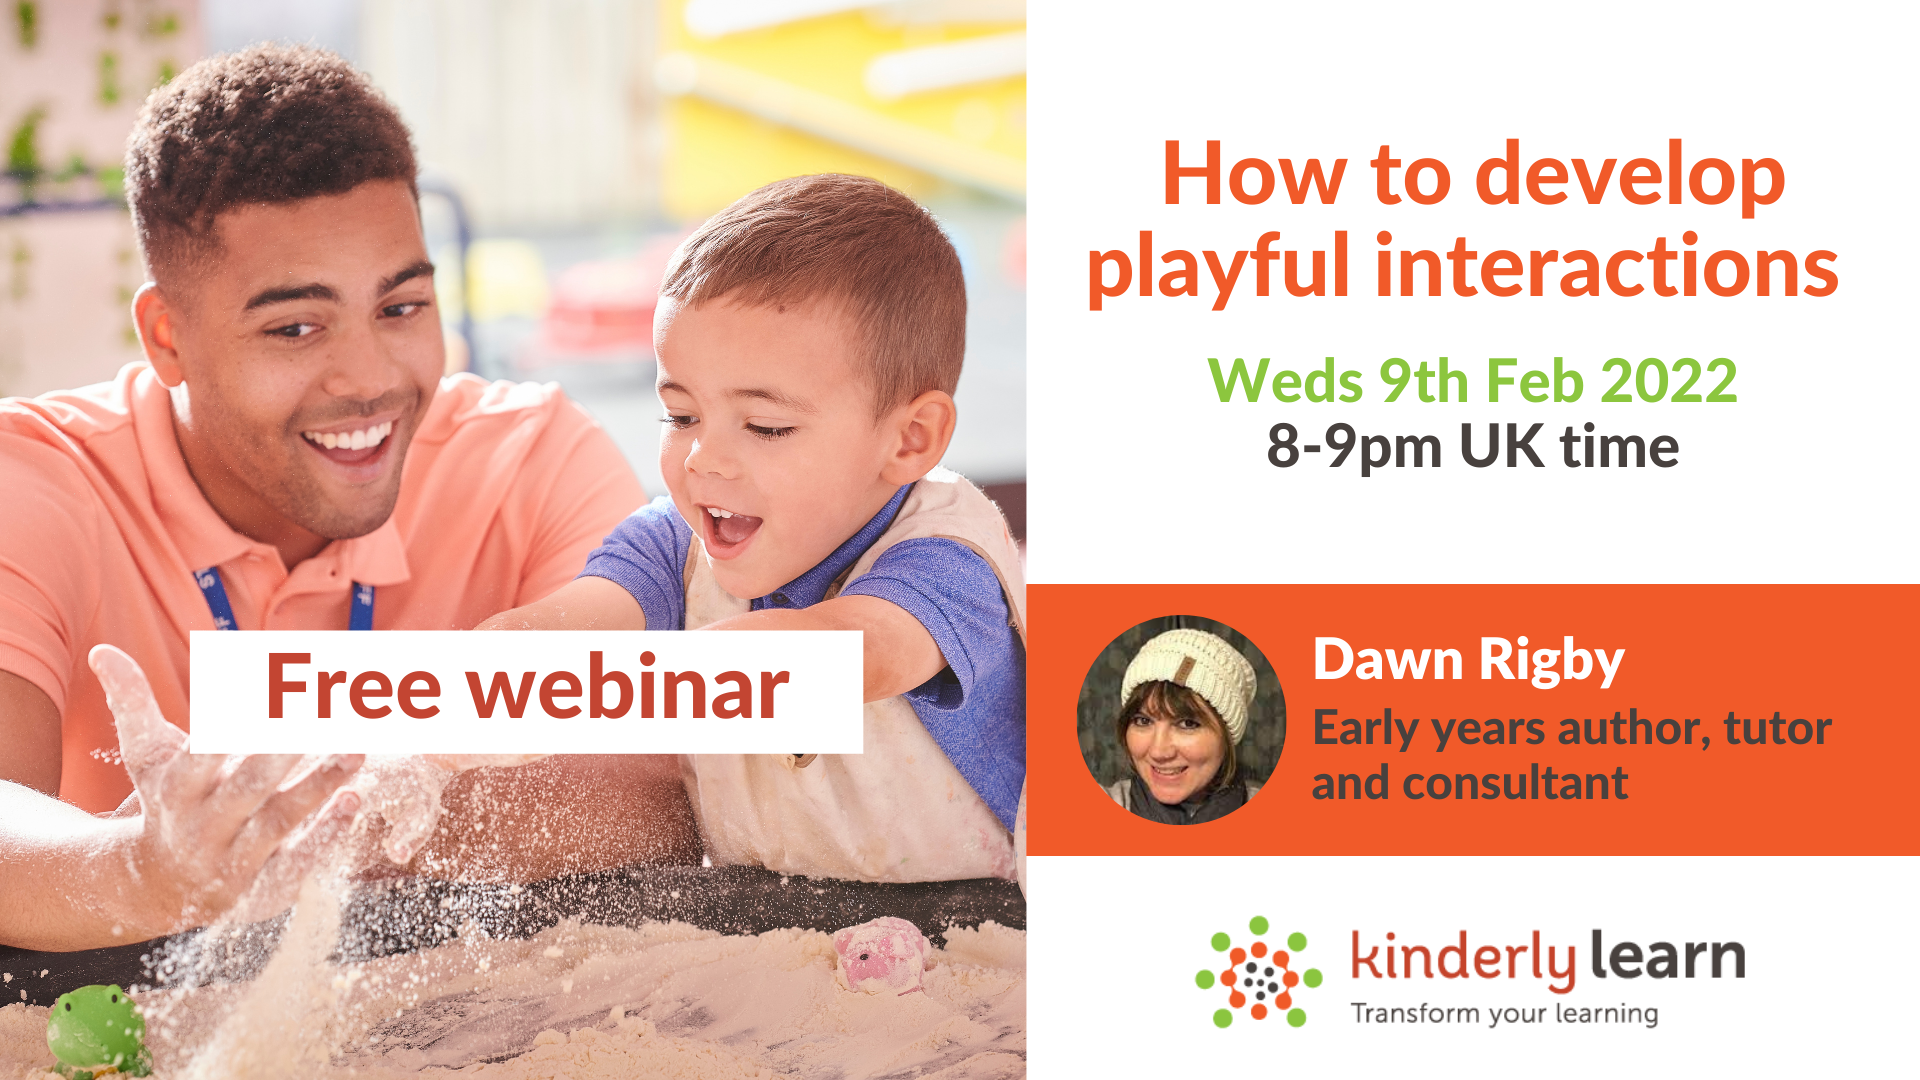 Playful interactions webinar with Dawn Rigby